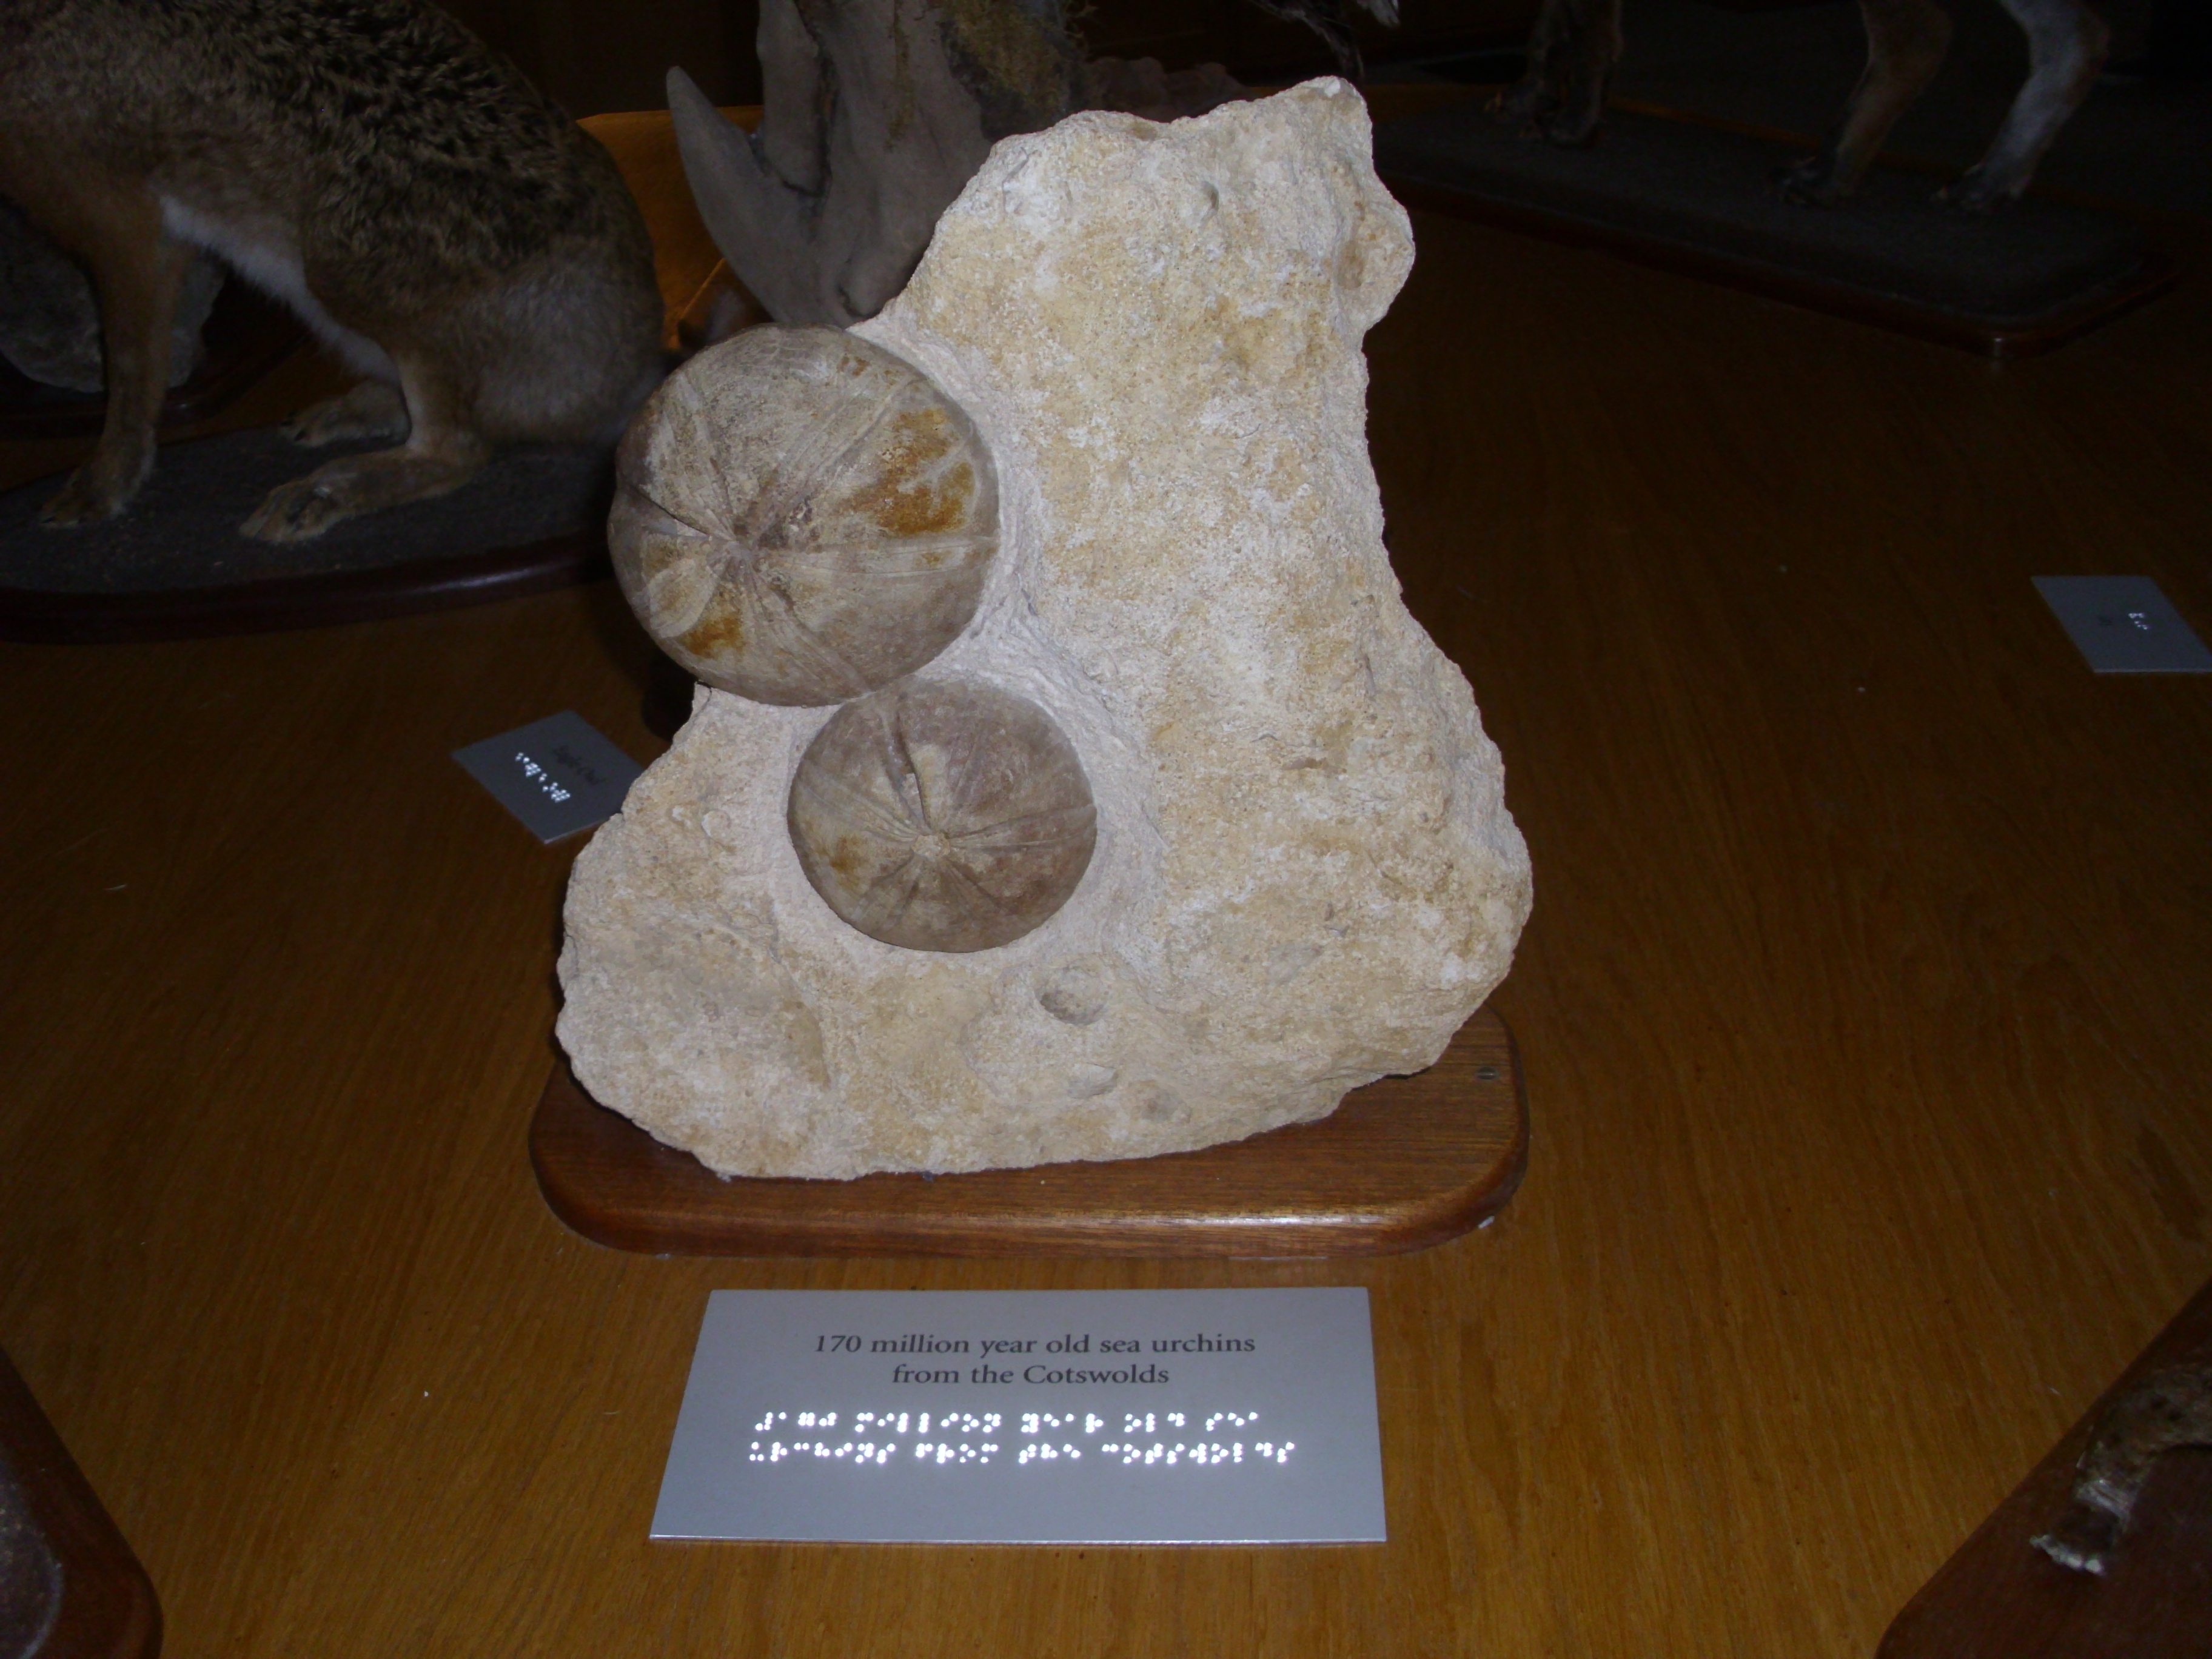 Dinosaur Eggs from the Cotswolds